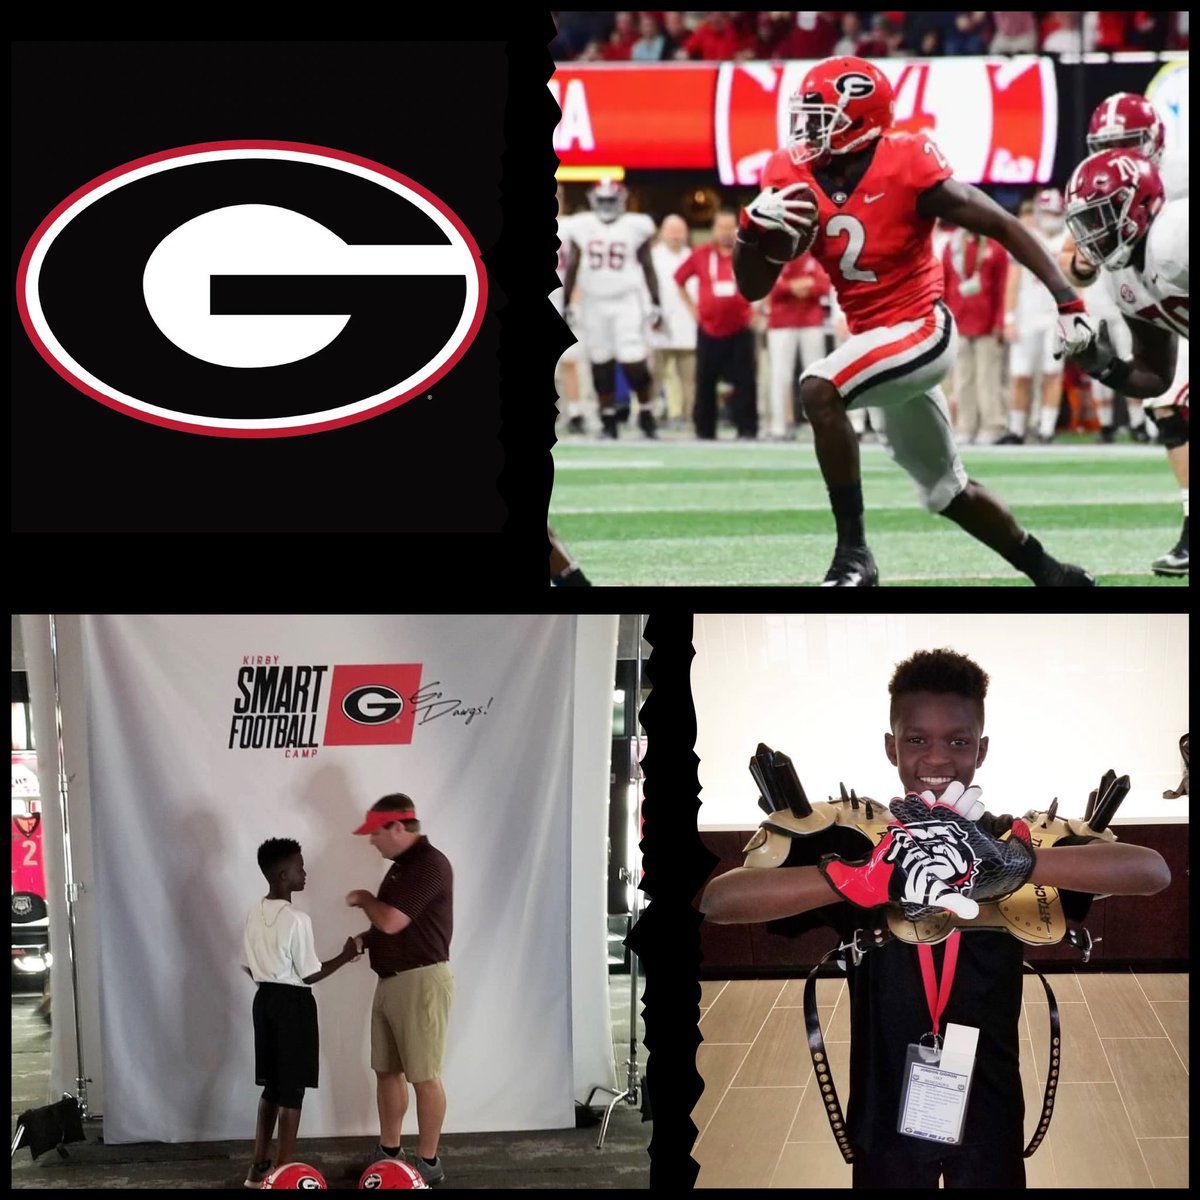 I am beyond grateful and extremely excited to receive an 🅾️ffer from The University of Georgia to play for @GeorgiaFootball 🔴⚪️ #GoDawgs @KirbySmartUGA @CoachColey @CoachJCrawford @Dawgs247 @ugasportscom @DawgsHQ @RivalsFriedman @adamgorney @RivalsWardlaw @247recruiting…